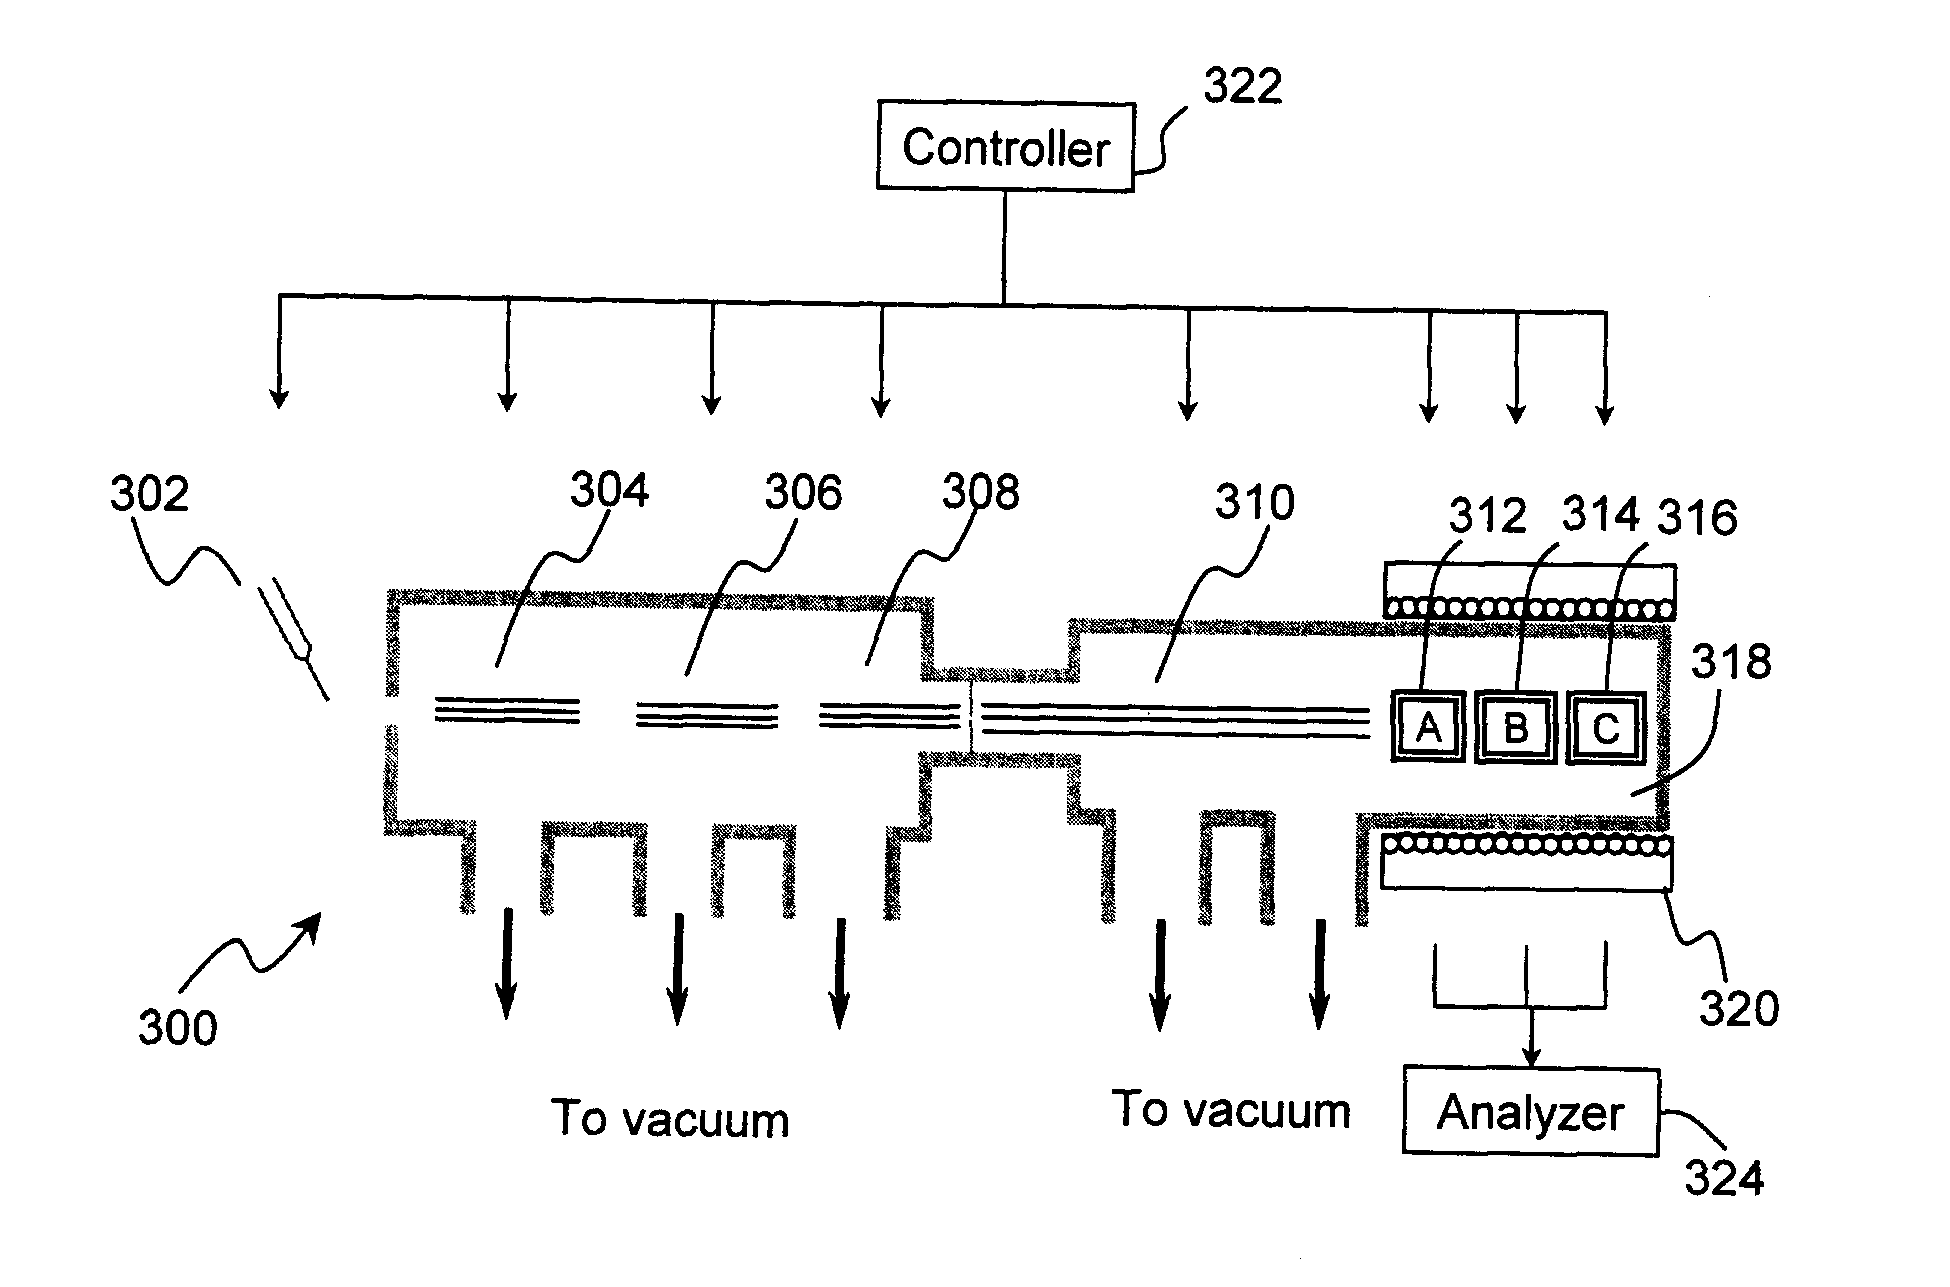 Method and apparatus for fourier transform ion cyclotron resonance mass spectrometry